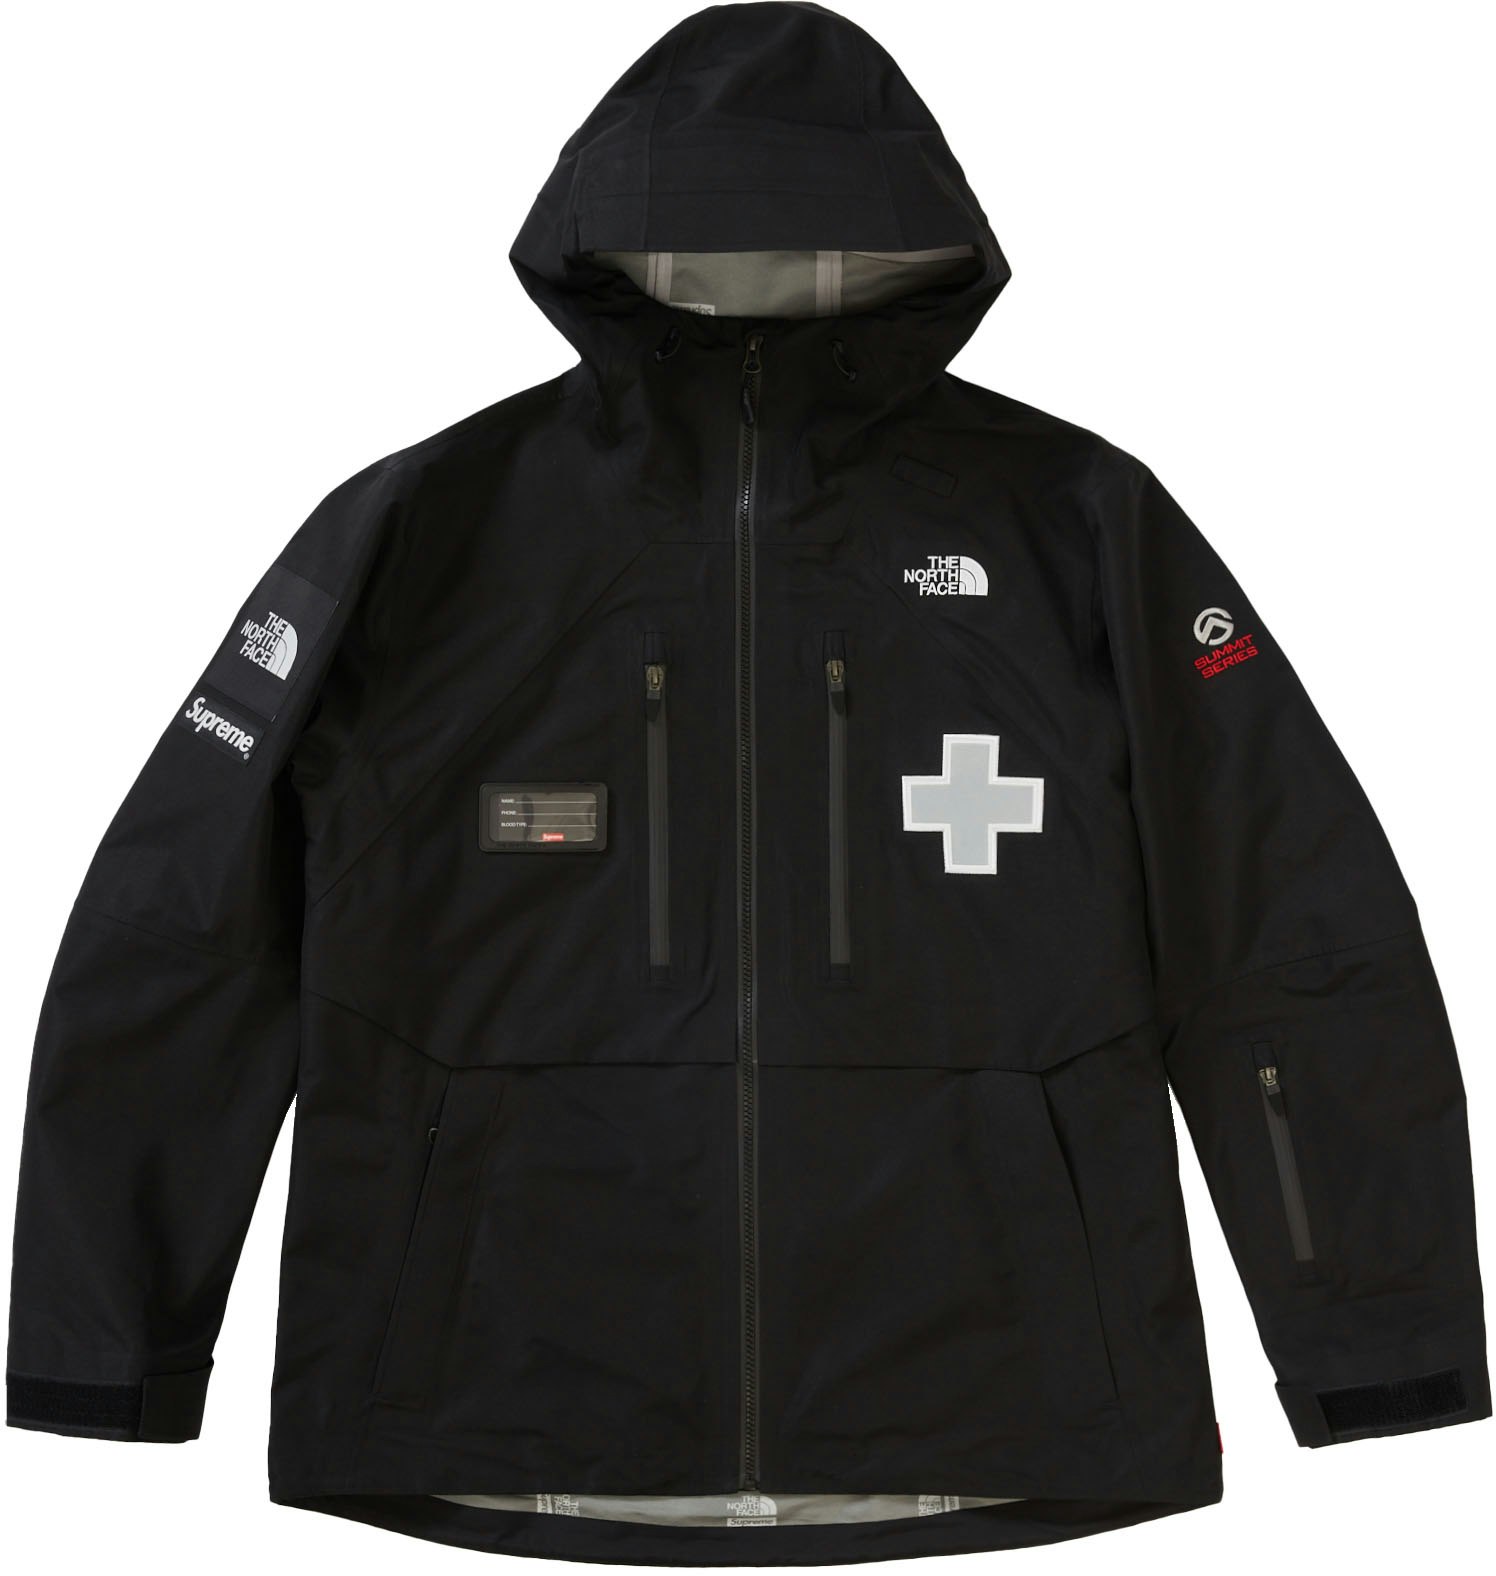 Supreme x The North Face Summit Series Rescue Mountain Pro Jacket